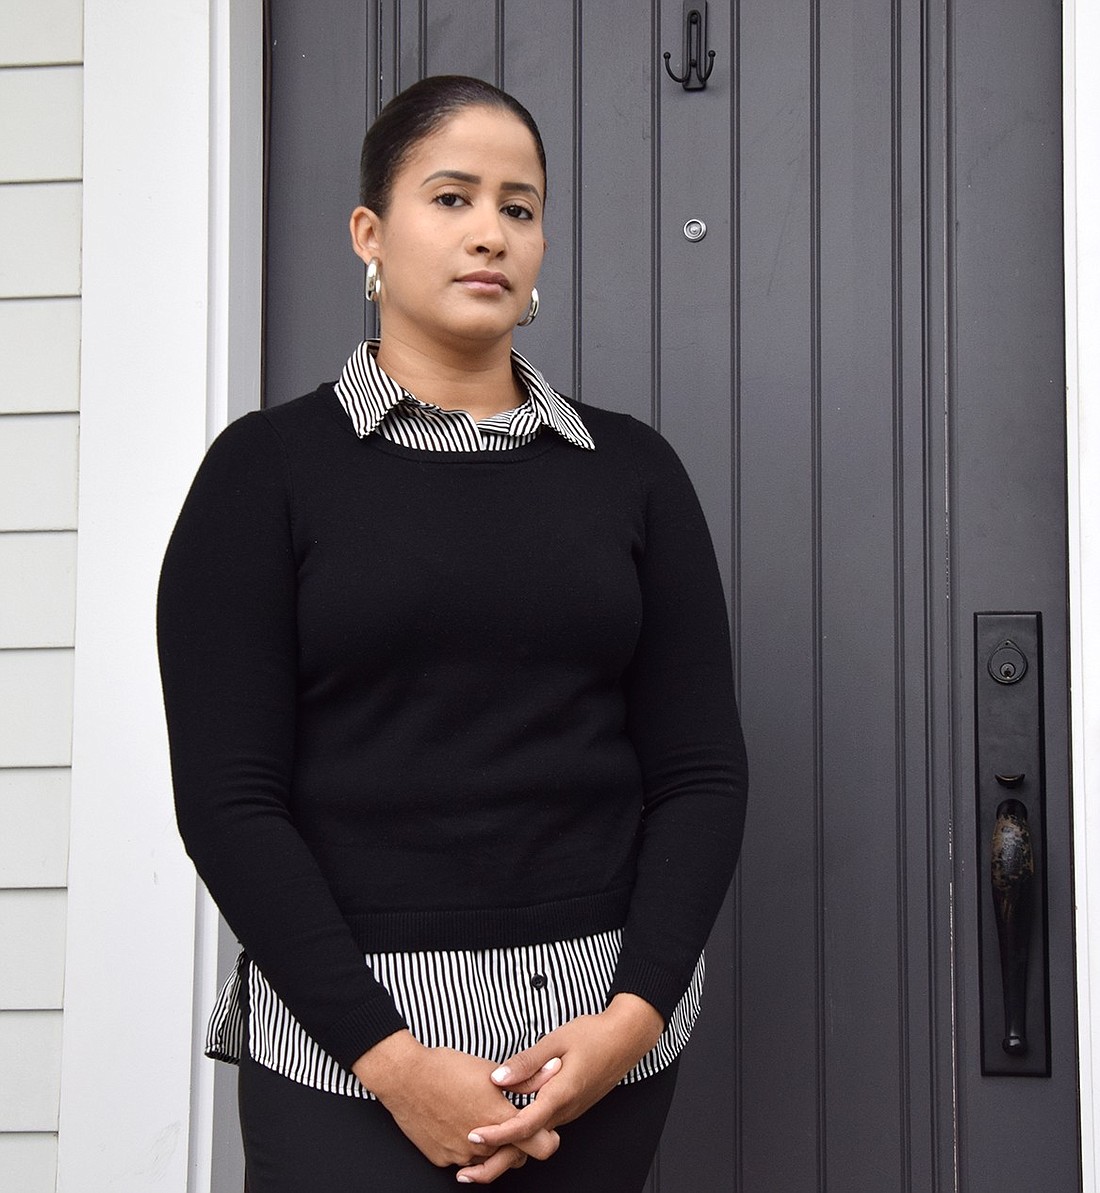 Laury De La Cruz, a homeowner of one of the Kingfield affordable housing units in Rye Brook, filed a discrimination complaint against affiliates of the complex based on her experience living there. The complaint was deemed to have probable cause by the Westchester Fair Housing Board, giving De La Cruz a platform to try and change the system.